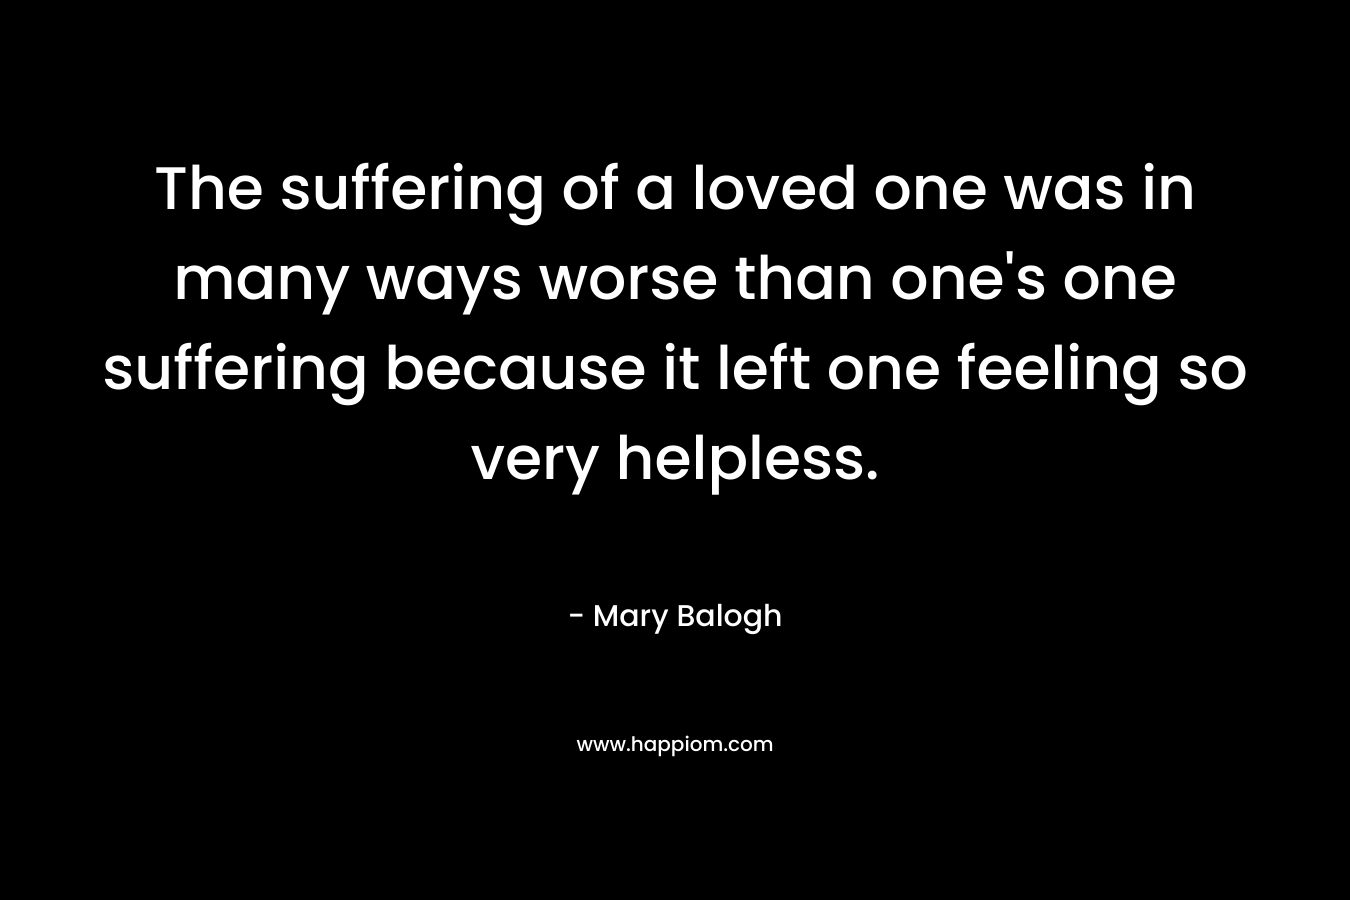 The suffering of a loved one was in many ways worse than one’s one suffering because it left one feeling so very helpless. – Mary Balogh